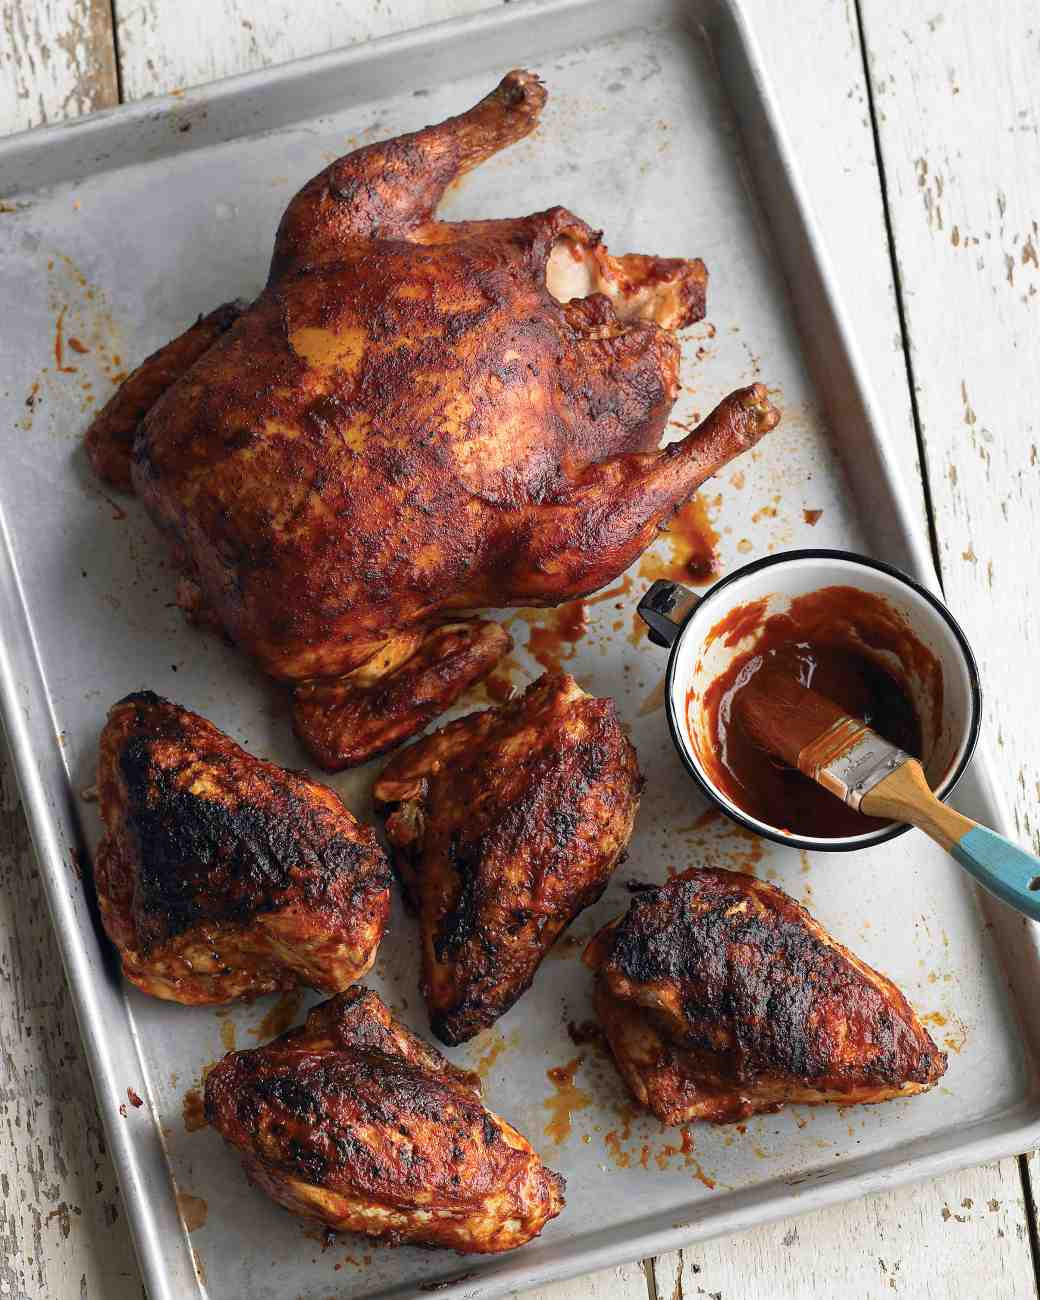 Grilled Whole Chicken Recipes
 Grilled Whole Chicken with Barbecue Sauce Recipe